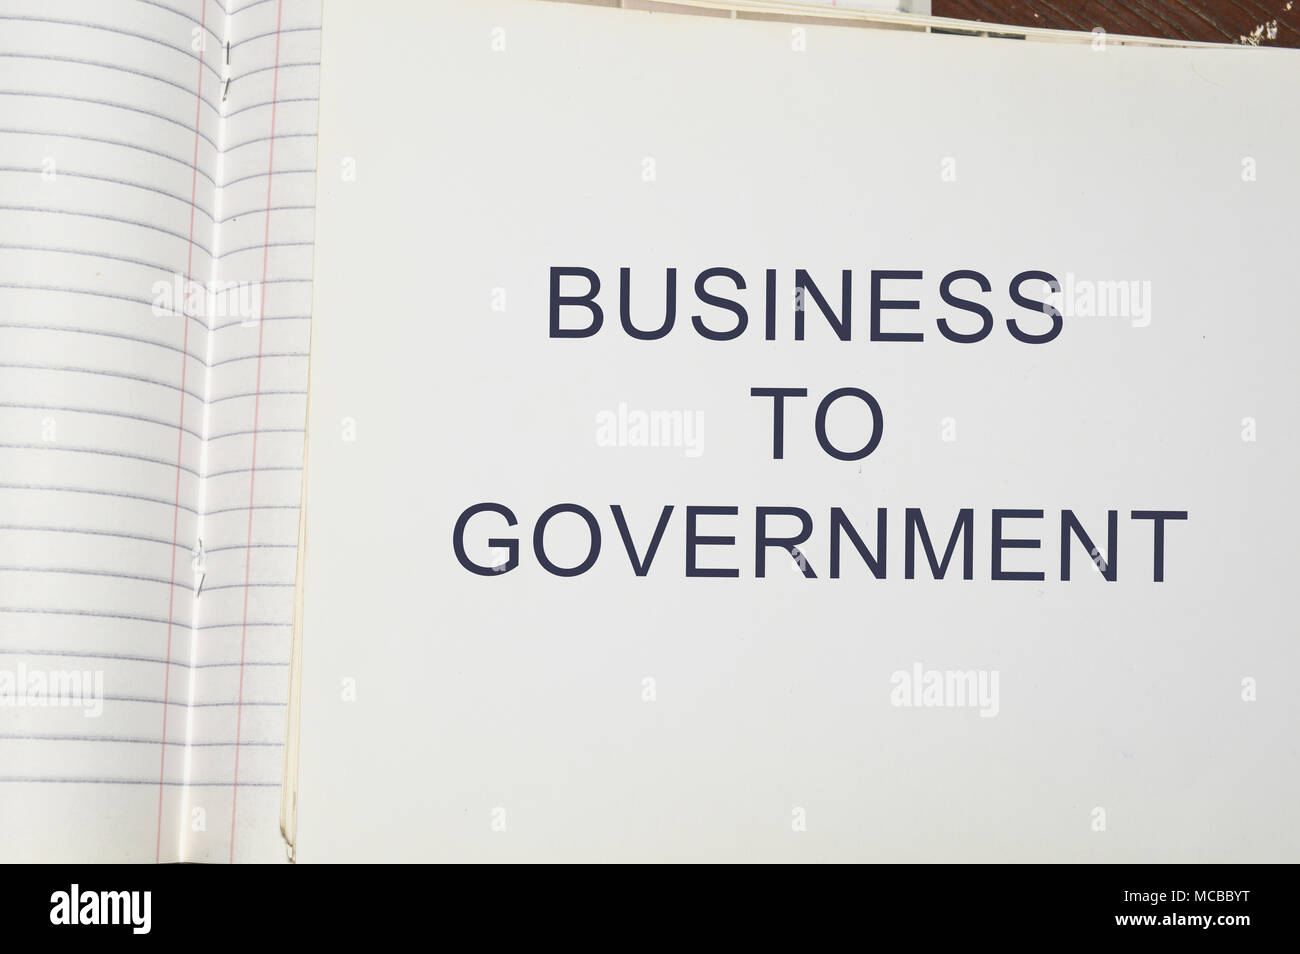 business to government written on white paper Stock Photo